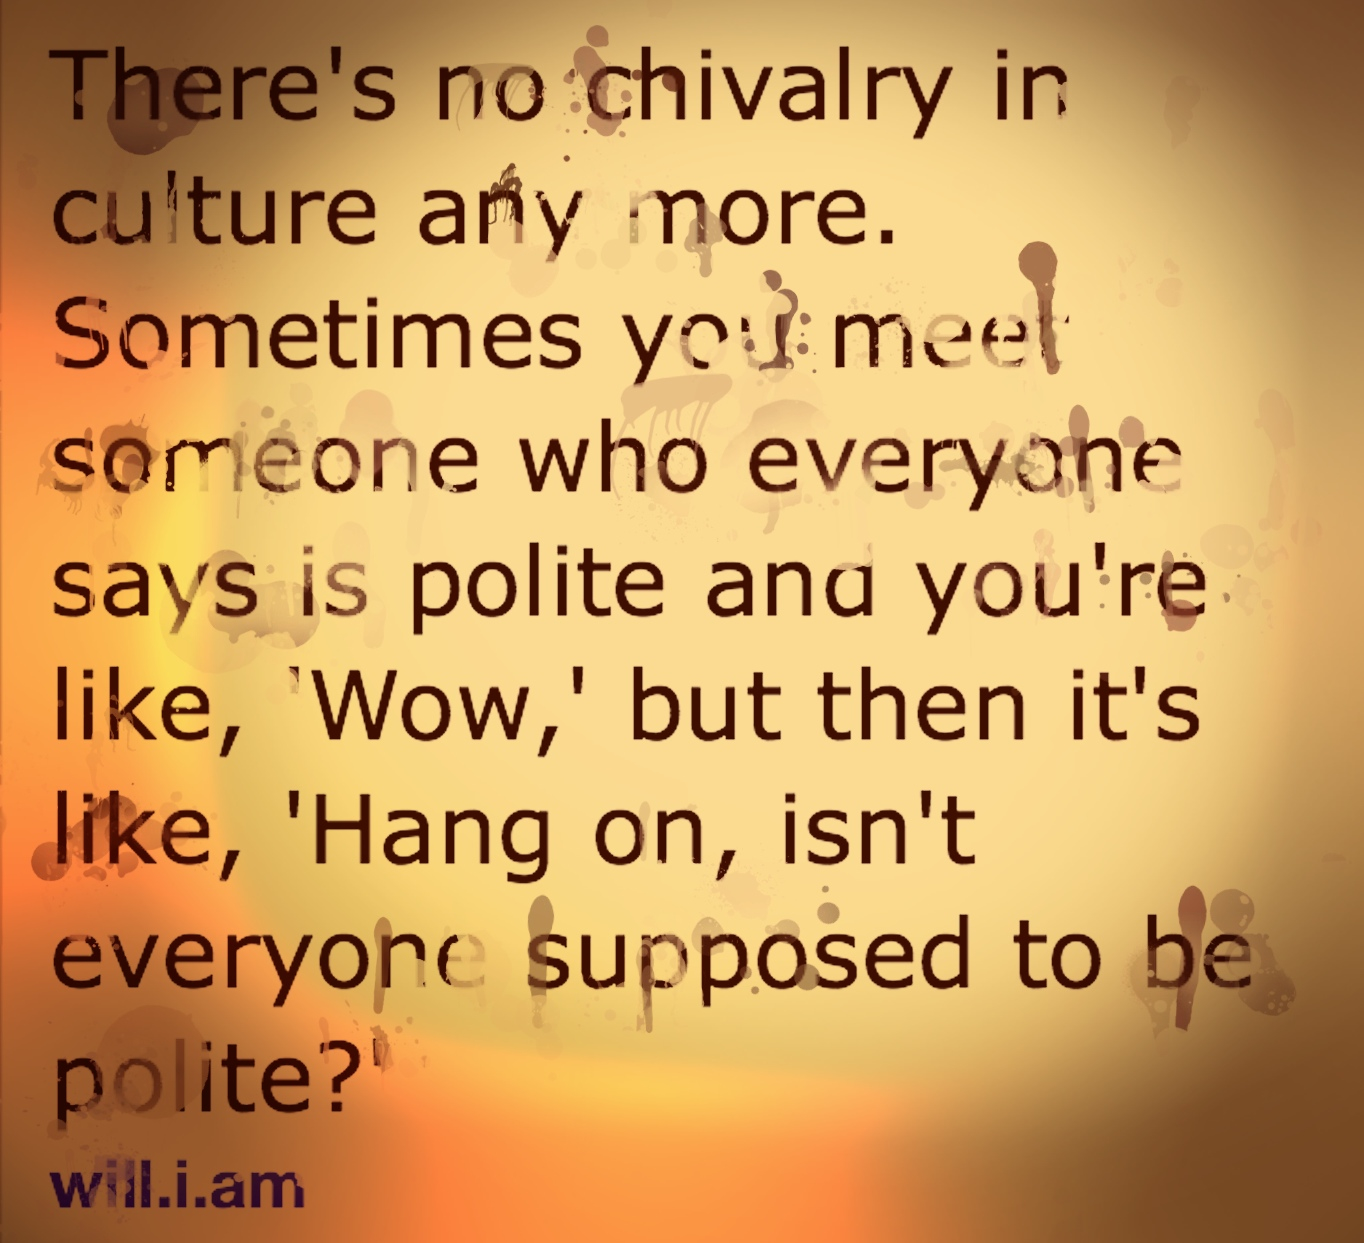 Quotes About Chivalry. QuotesGram